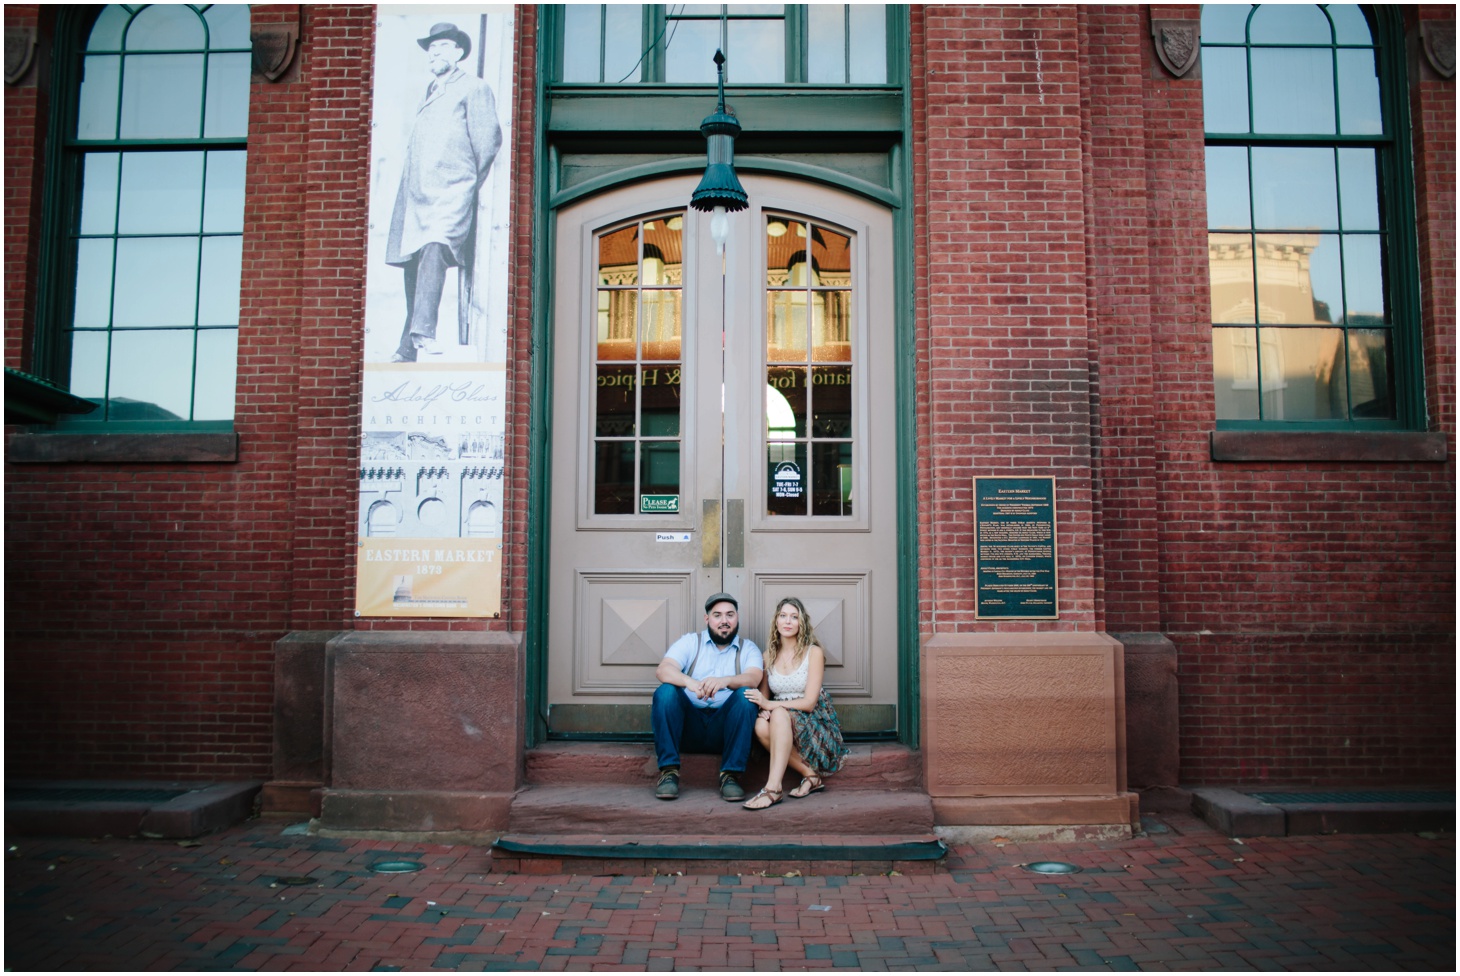 Summer Warmth Engagement at Lincoln Memorial & Eastern Market by Sarah Bradshaw Photography